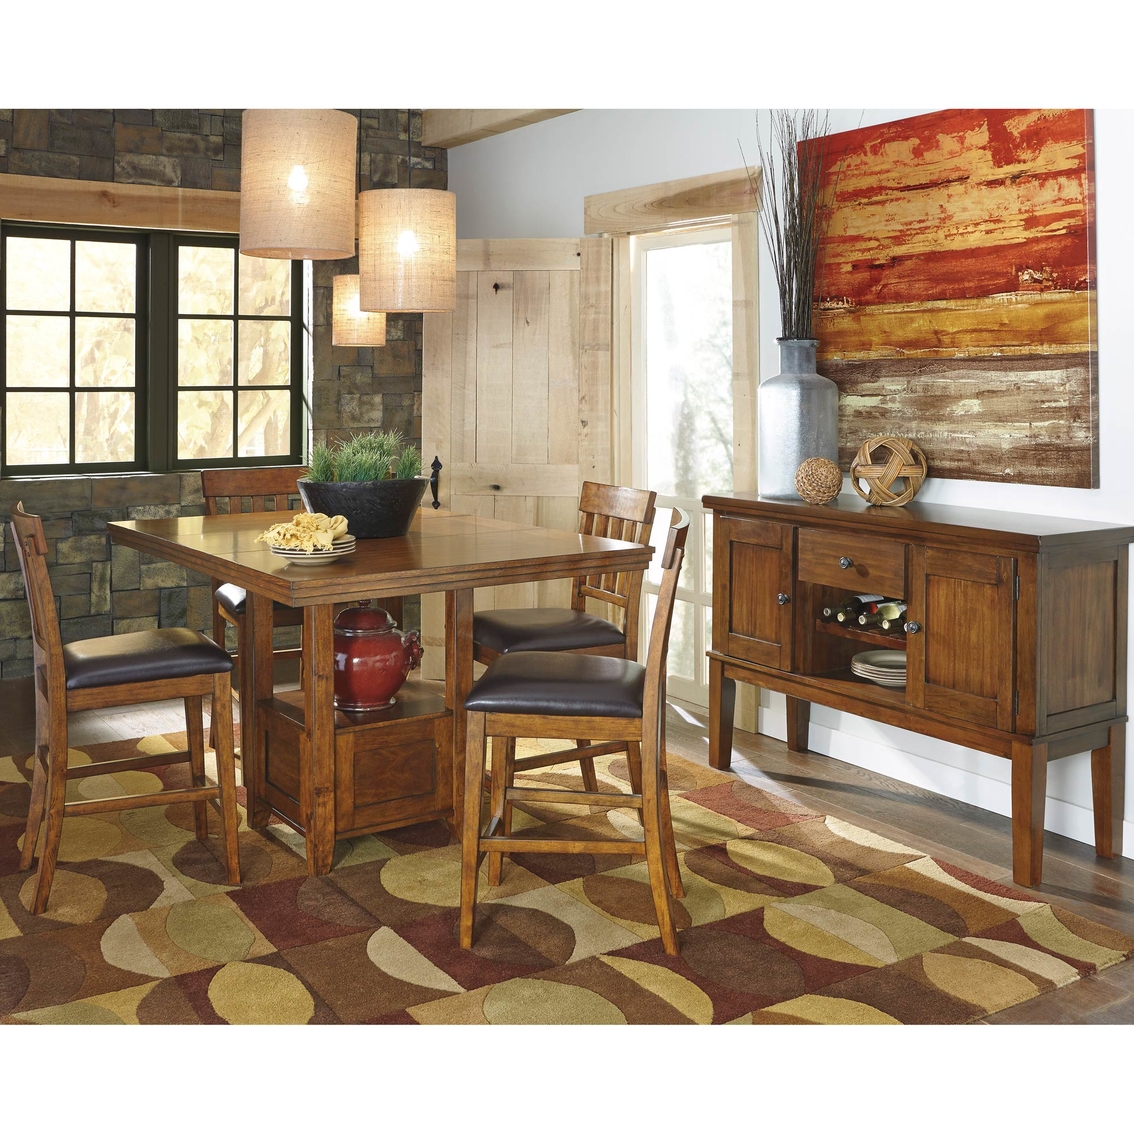 Signature Design by Ashley Ralene 6 pc. Butterfly Table Dining Set - Image 4 of 4